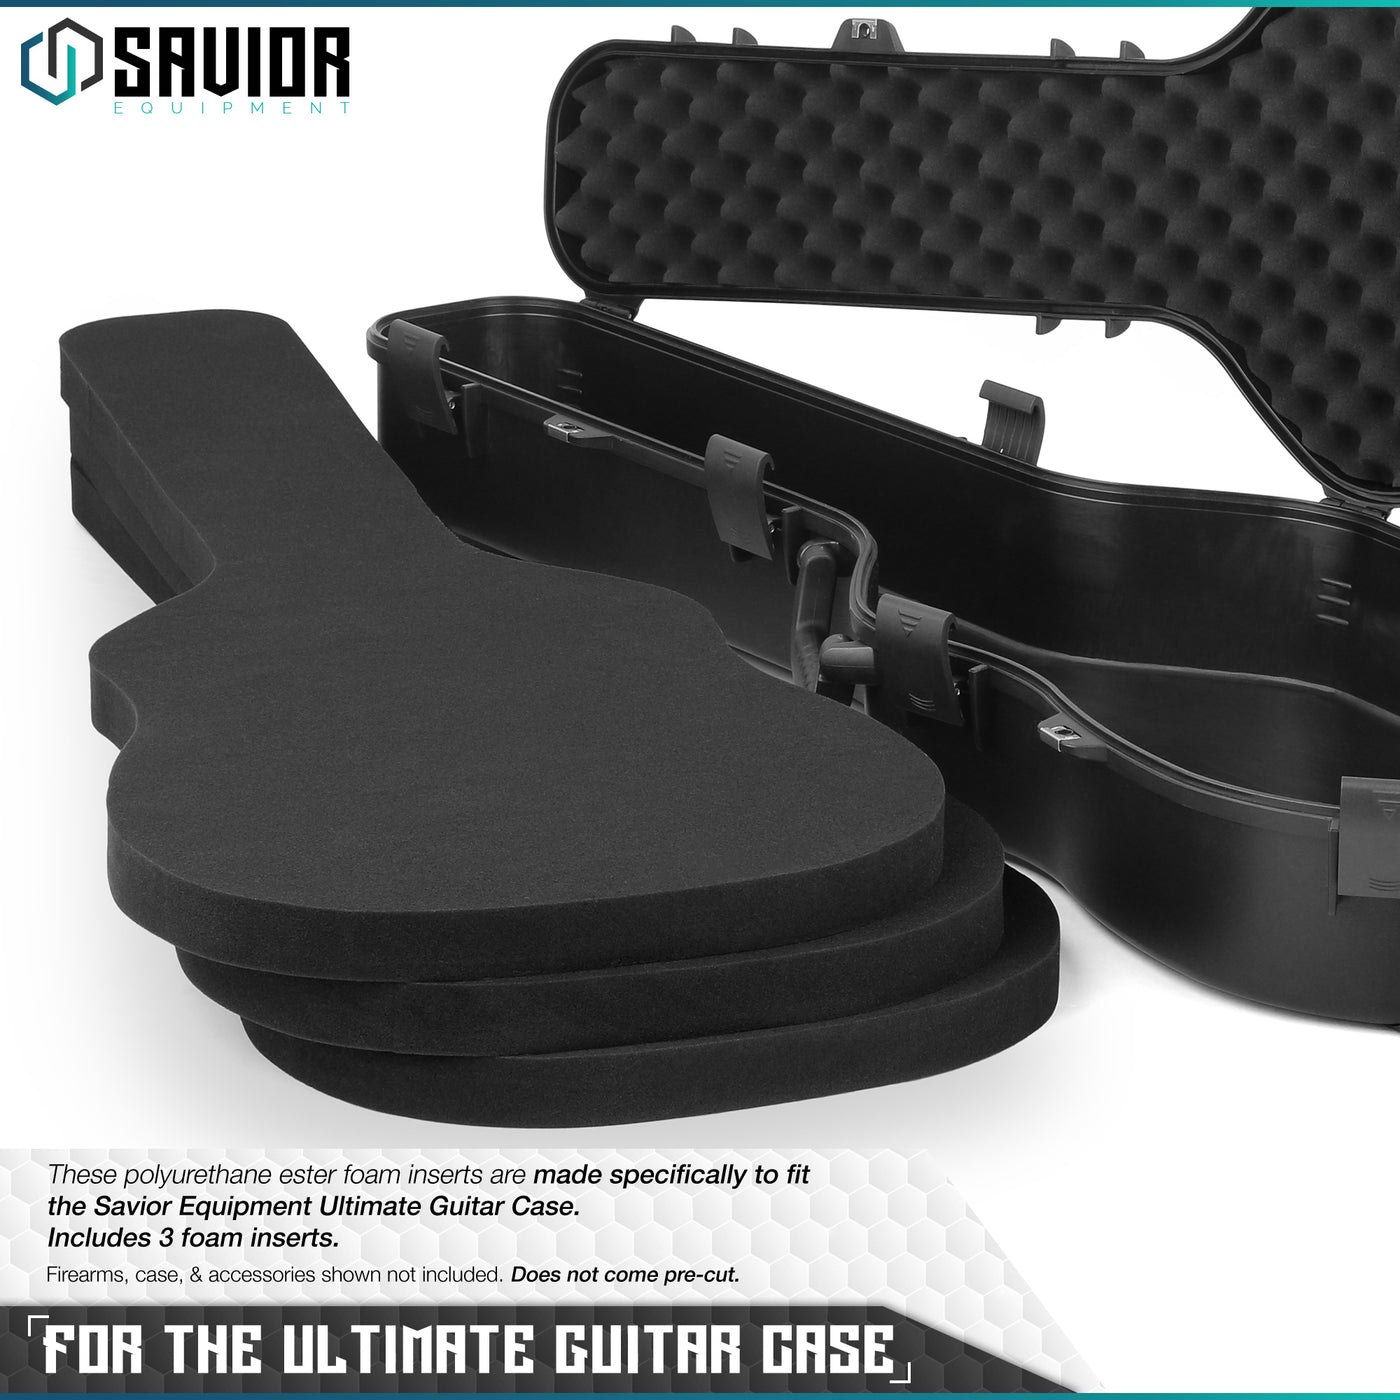 For The Ultimate Guitar Case - These polyurethane ester foam inserts are made specifically to fit the Savior Equipment Ultimate Guitar Case. Firearms, case, & accessories shown not included. Does not come pre-cut.